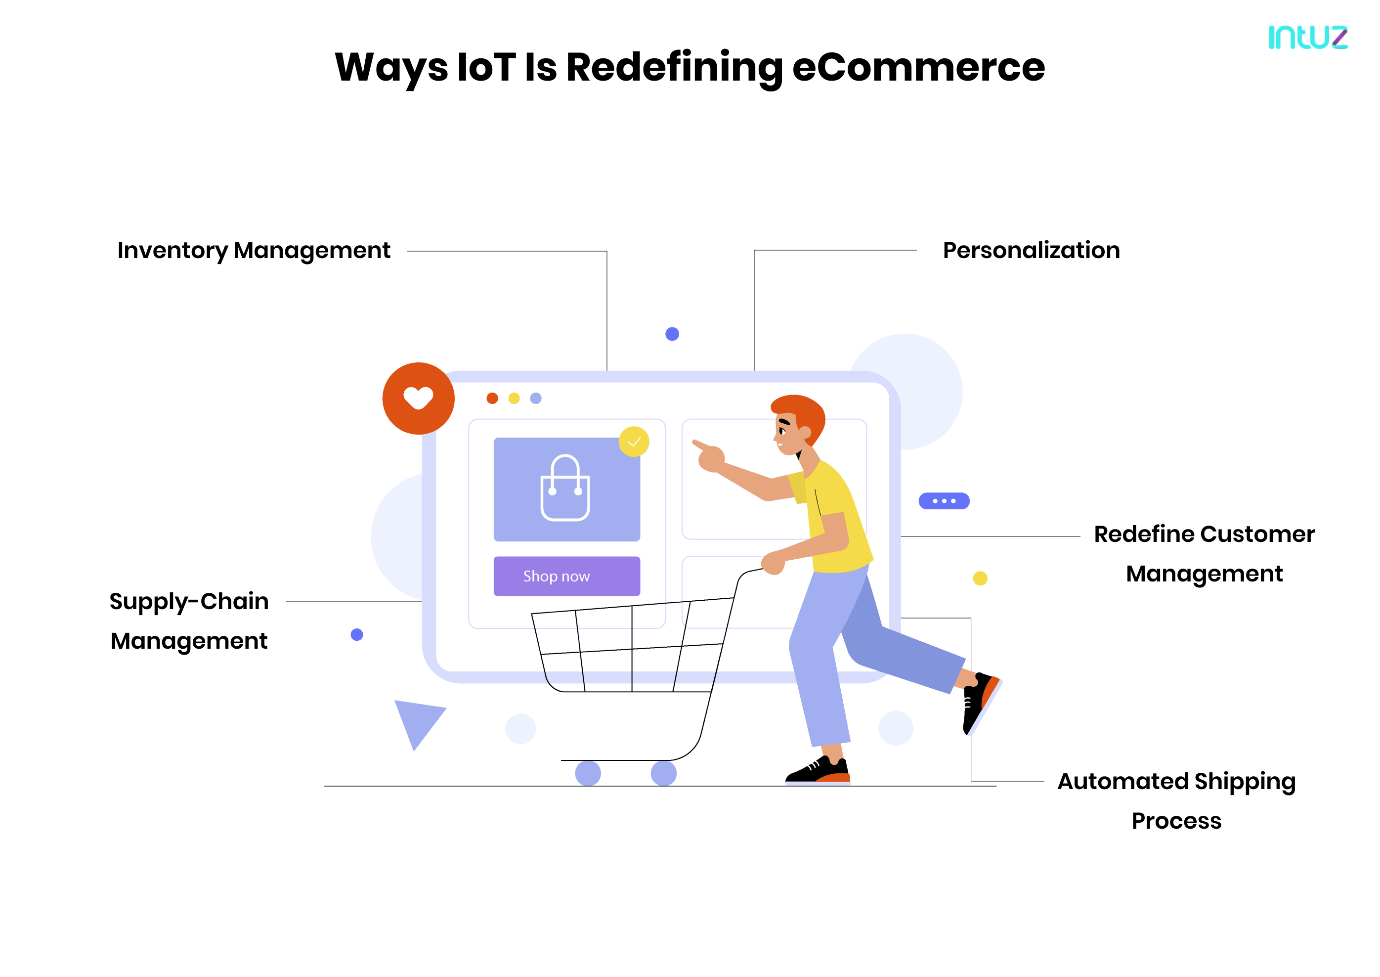 6 Ways IoT Is Redefining eCommerce